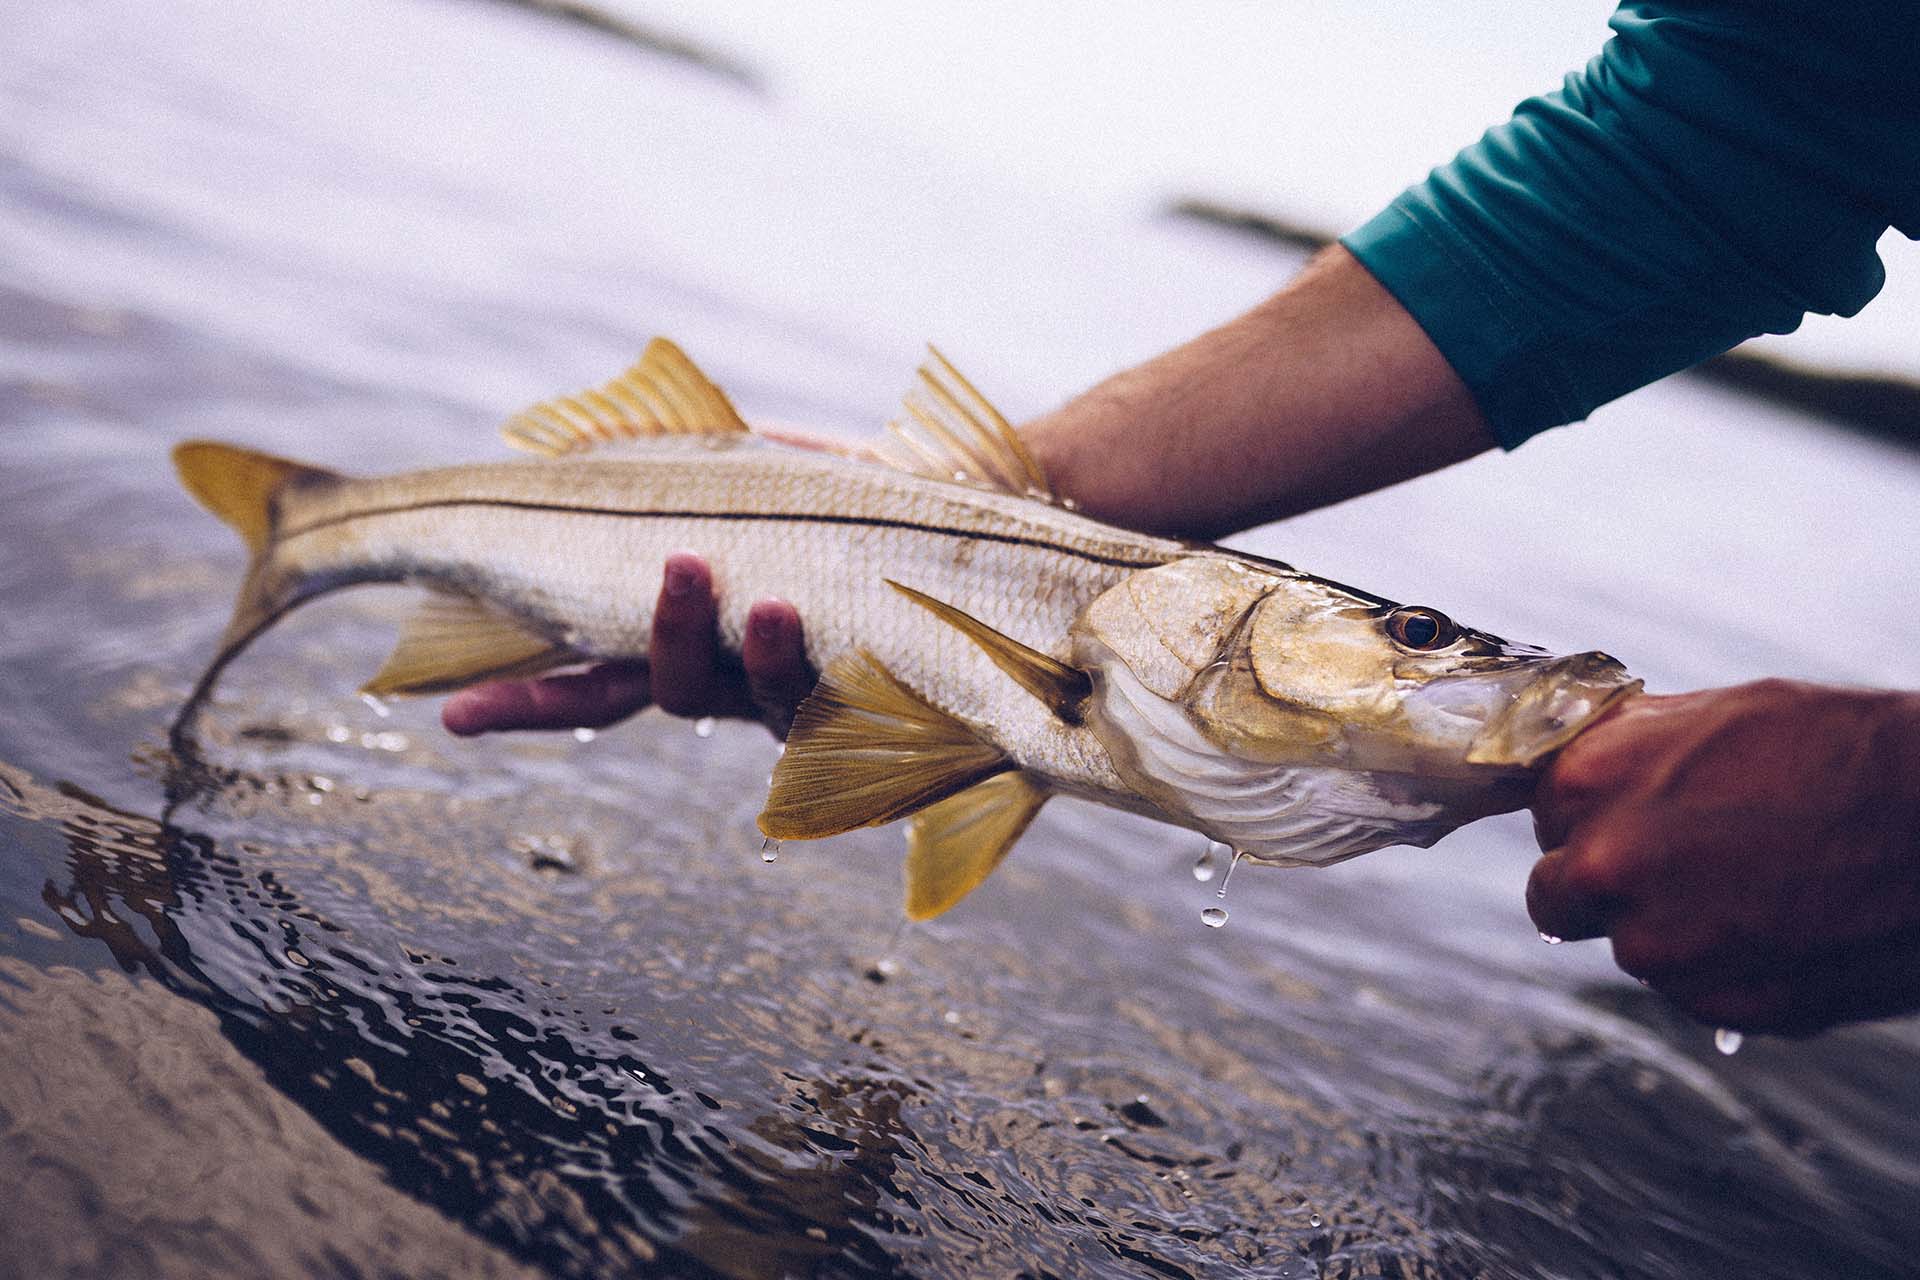 Full snook fish being held just outside of the water